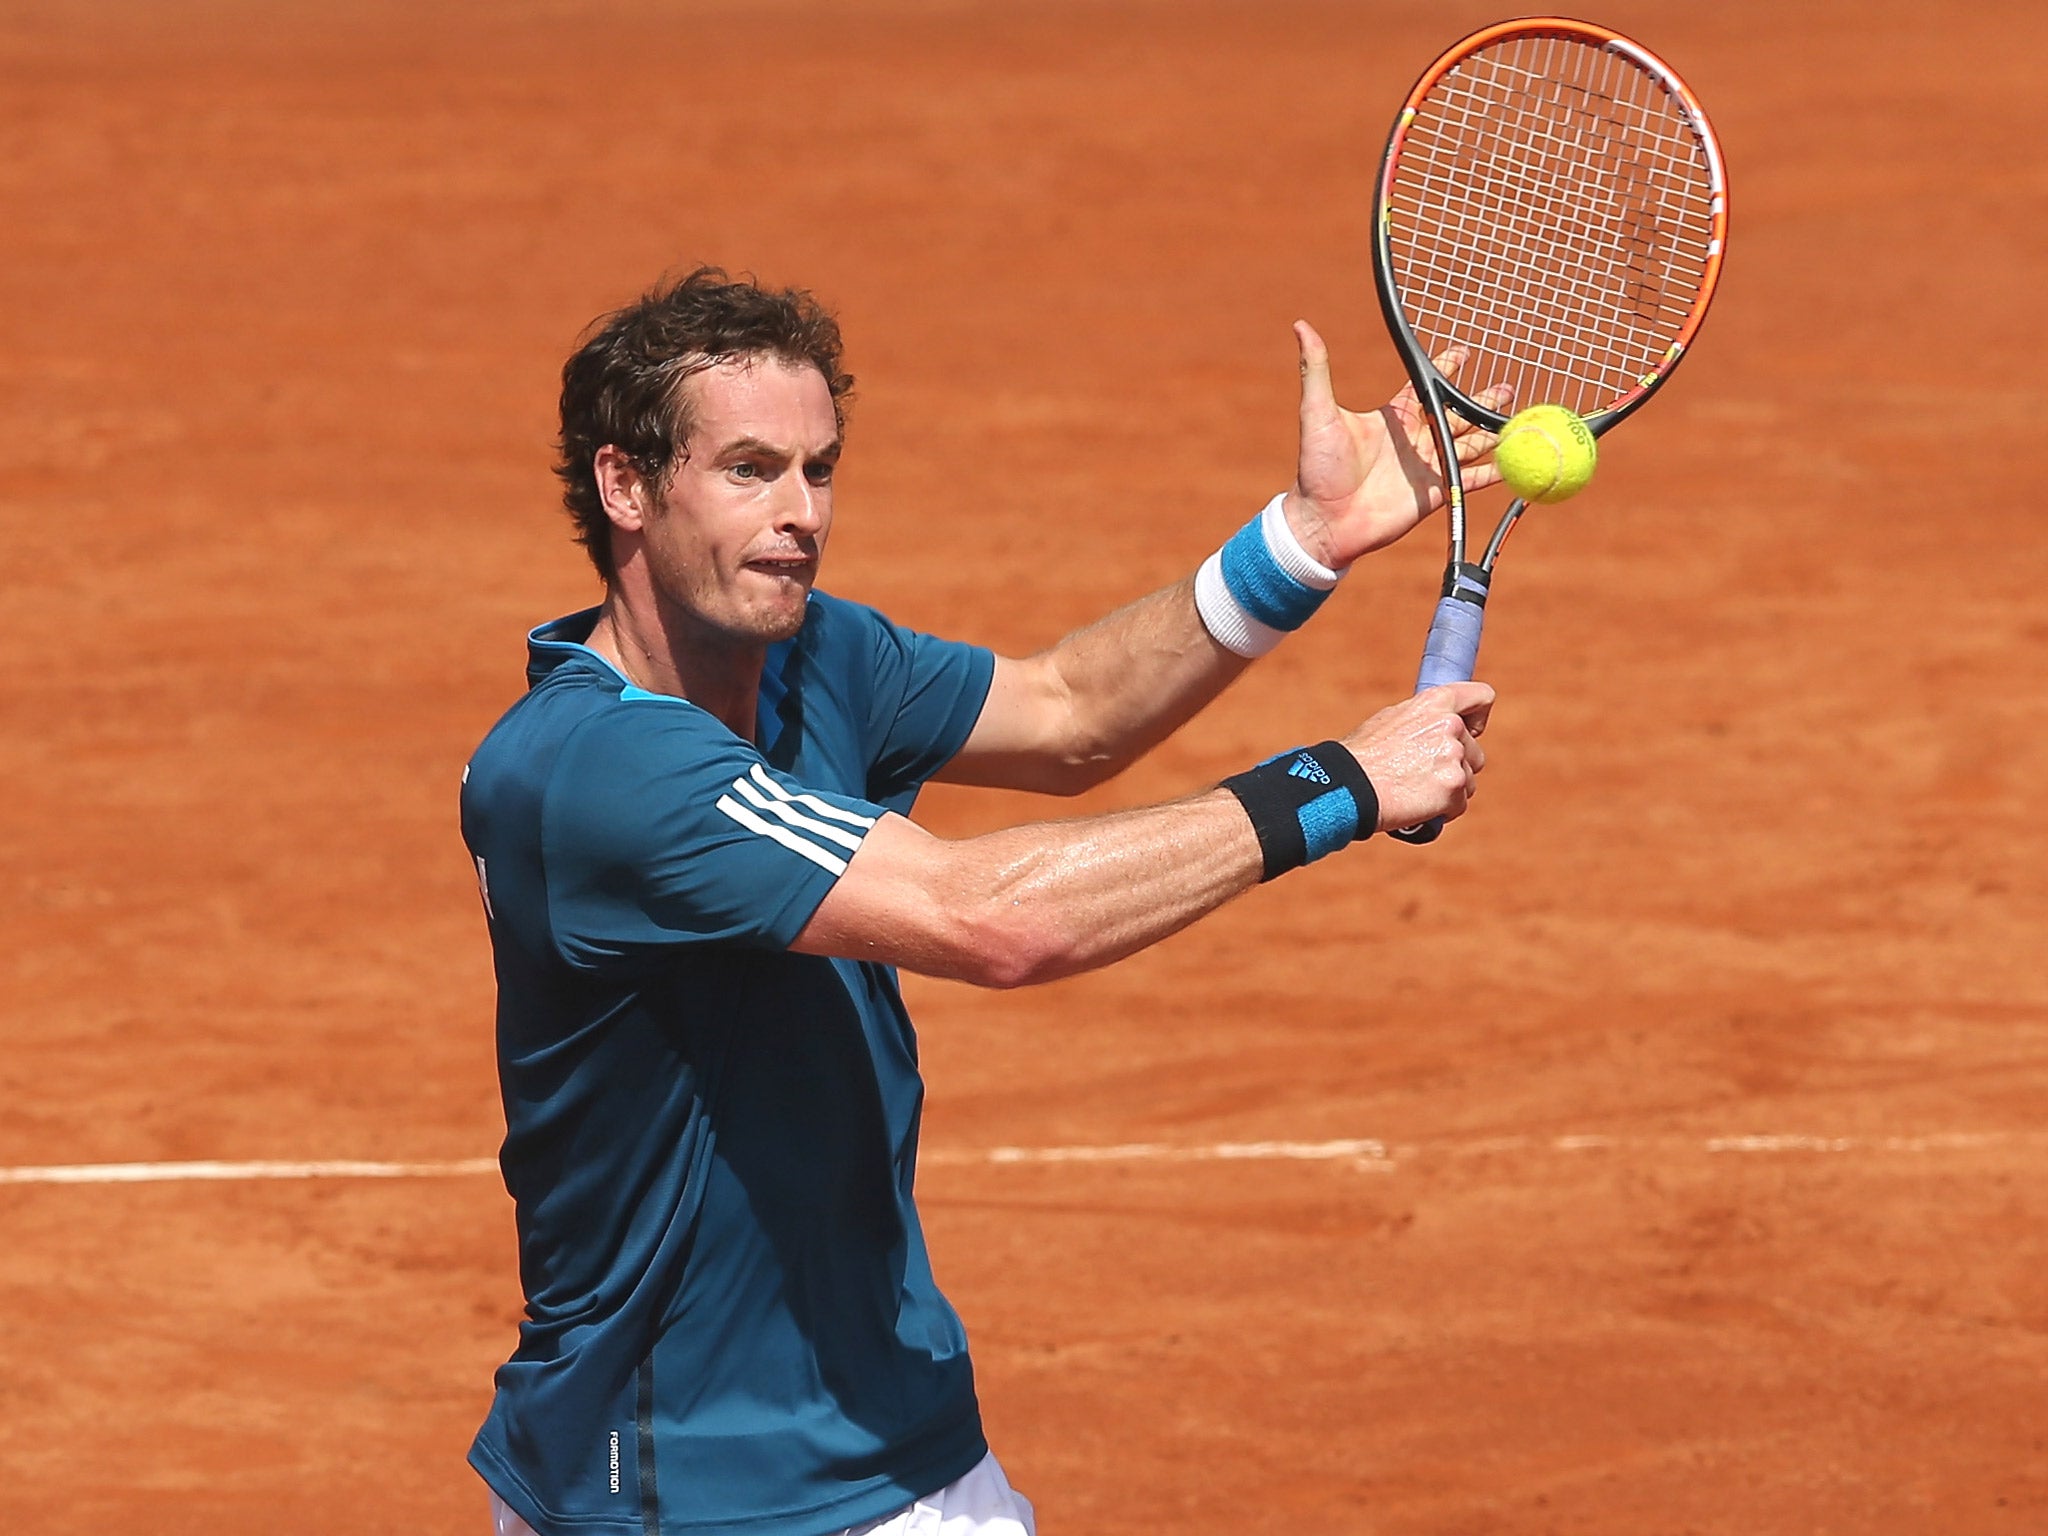 Andy Murray’s most recent experience on clay, the Davis Cup match against Italy in Naples, ended in defeat to Fabio Fognini in the singles